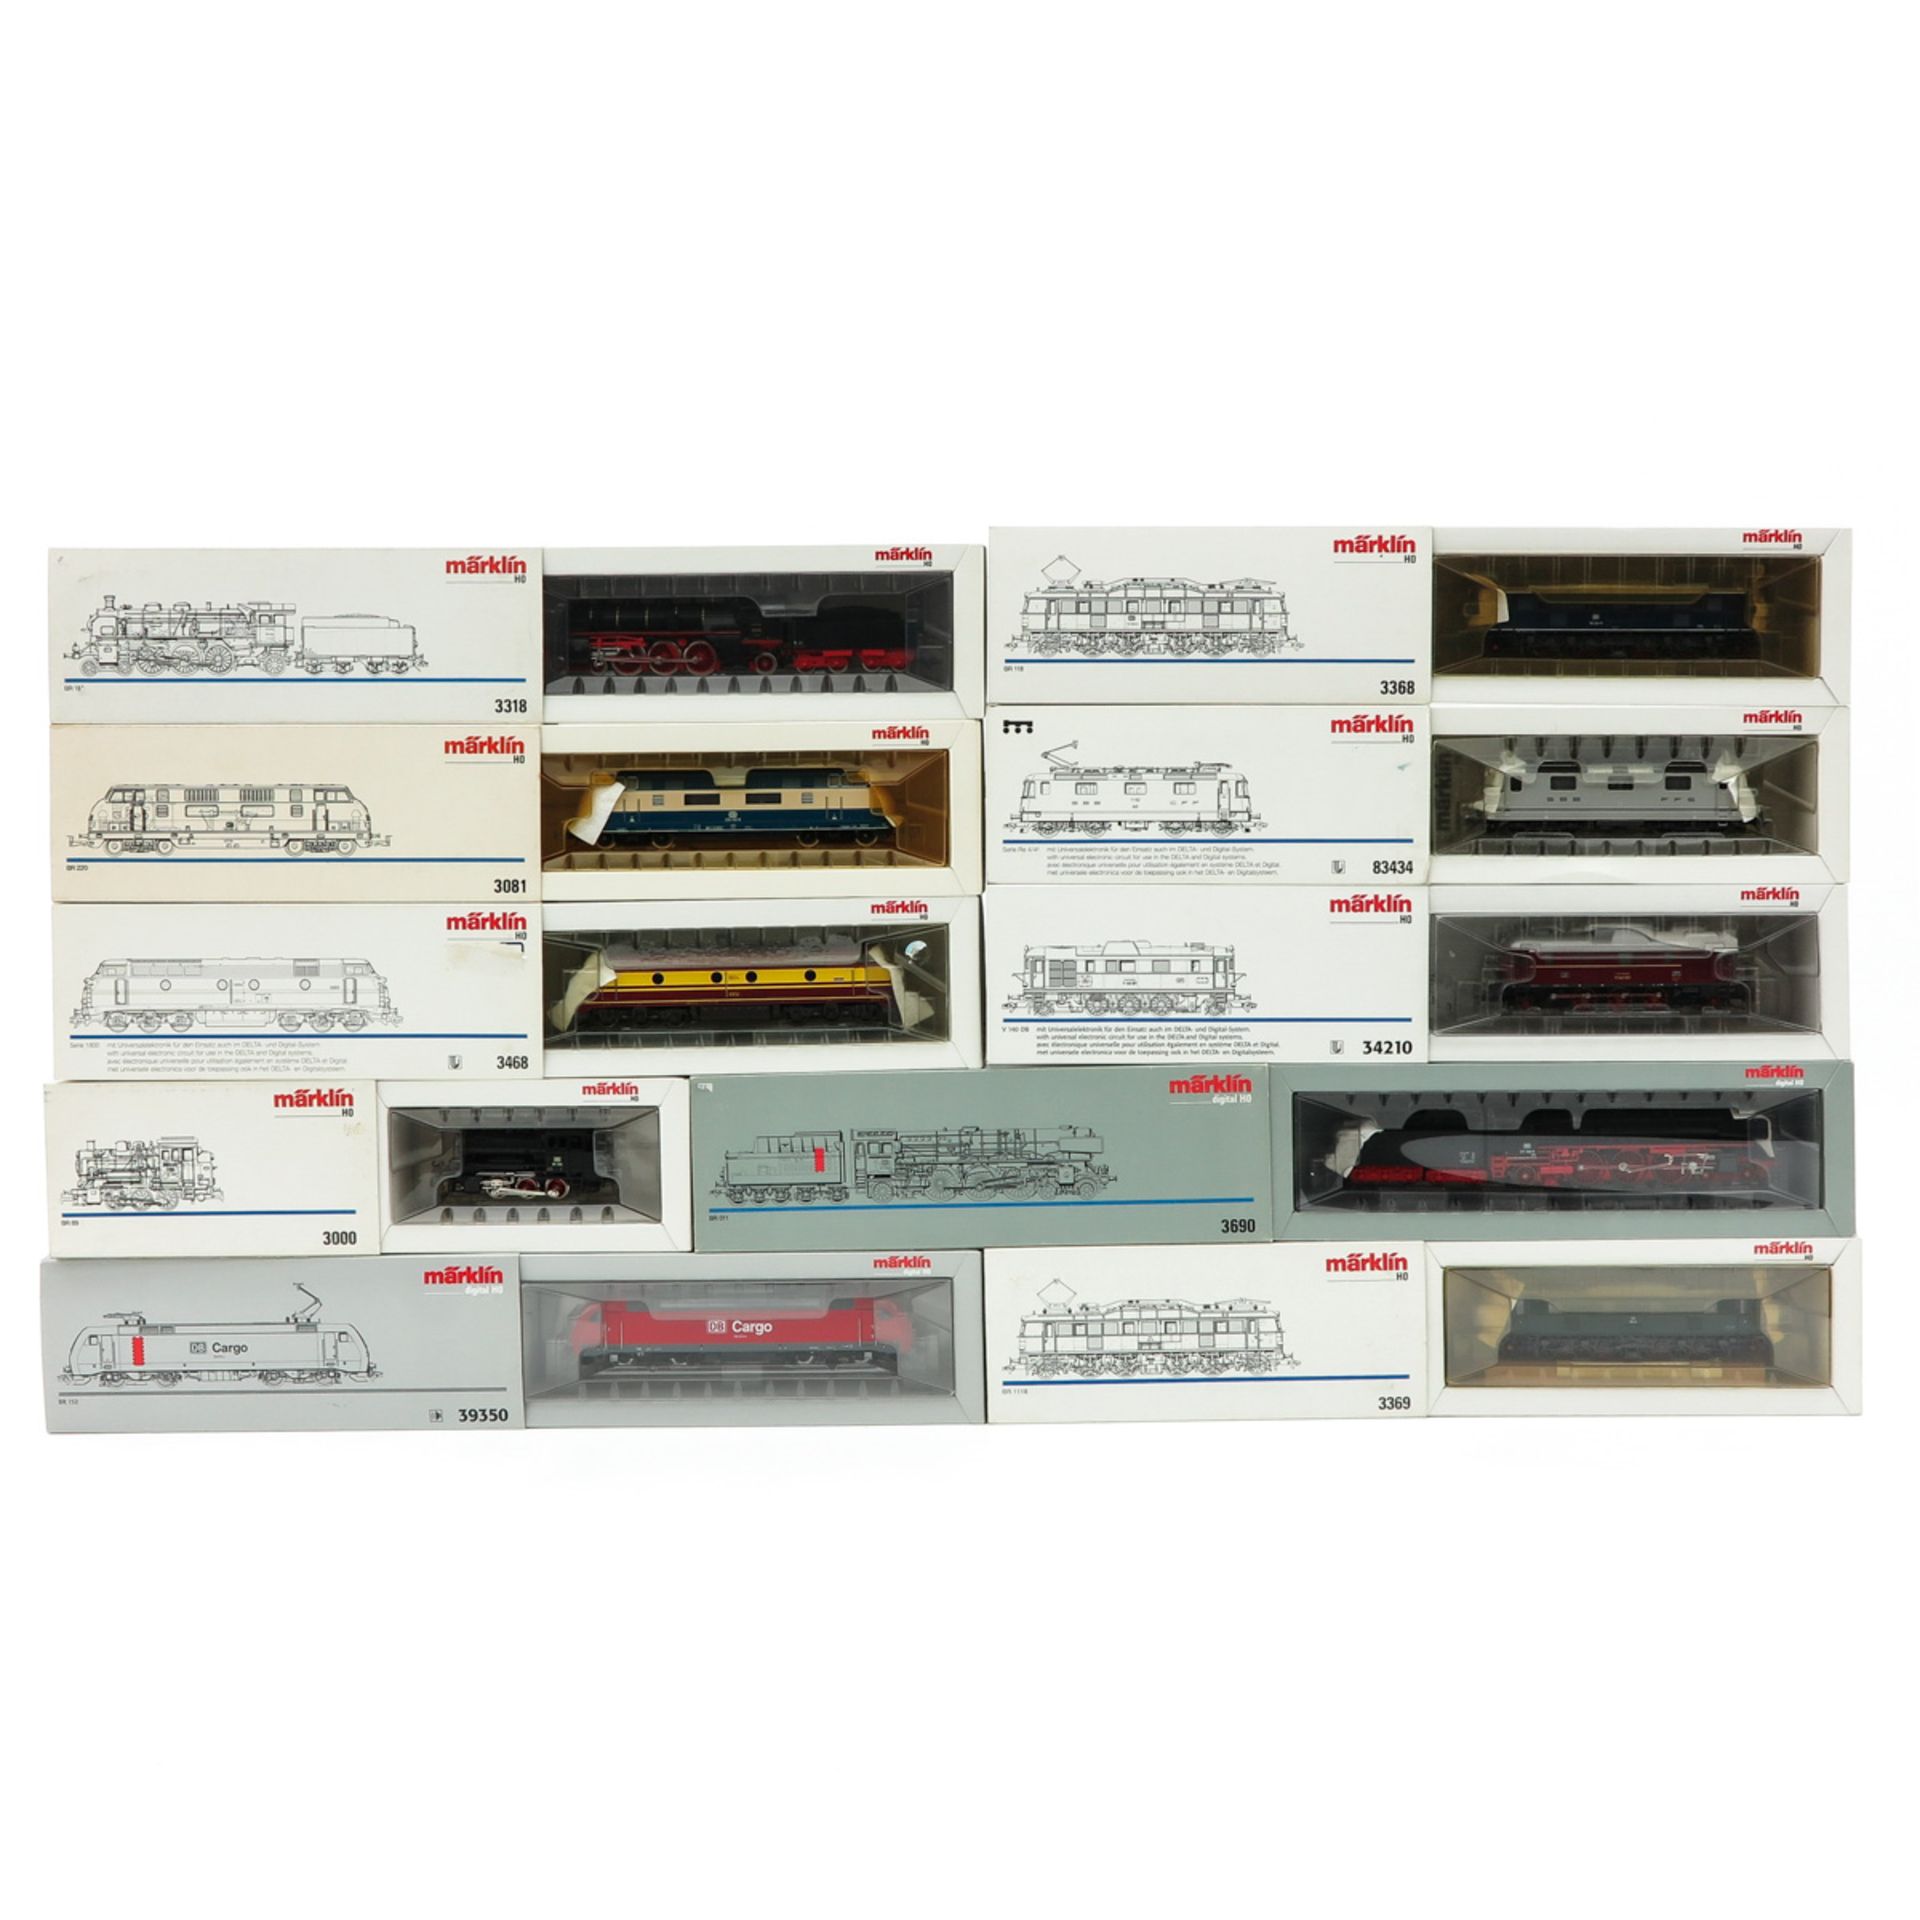 A Collection of Marklin Locomotives - Image 2 of 3